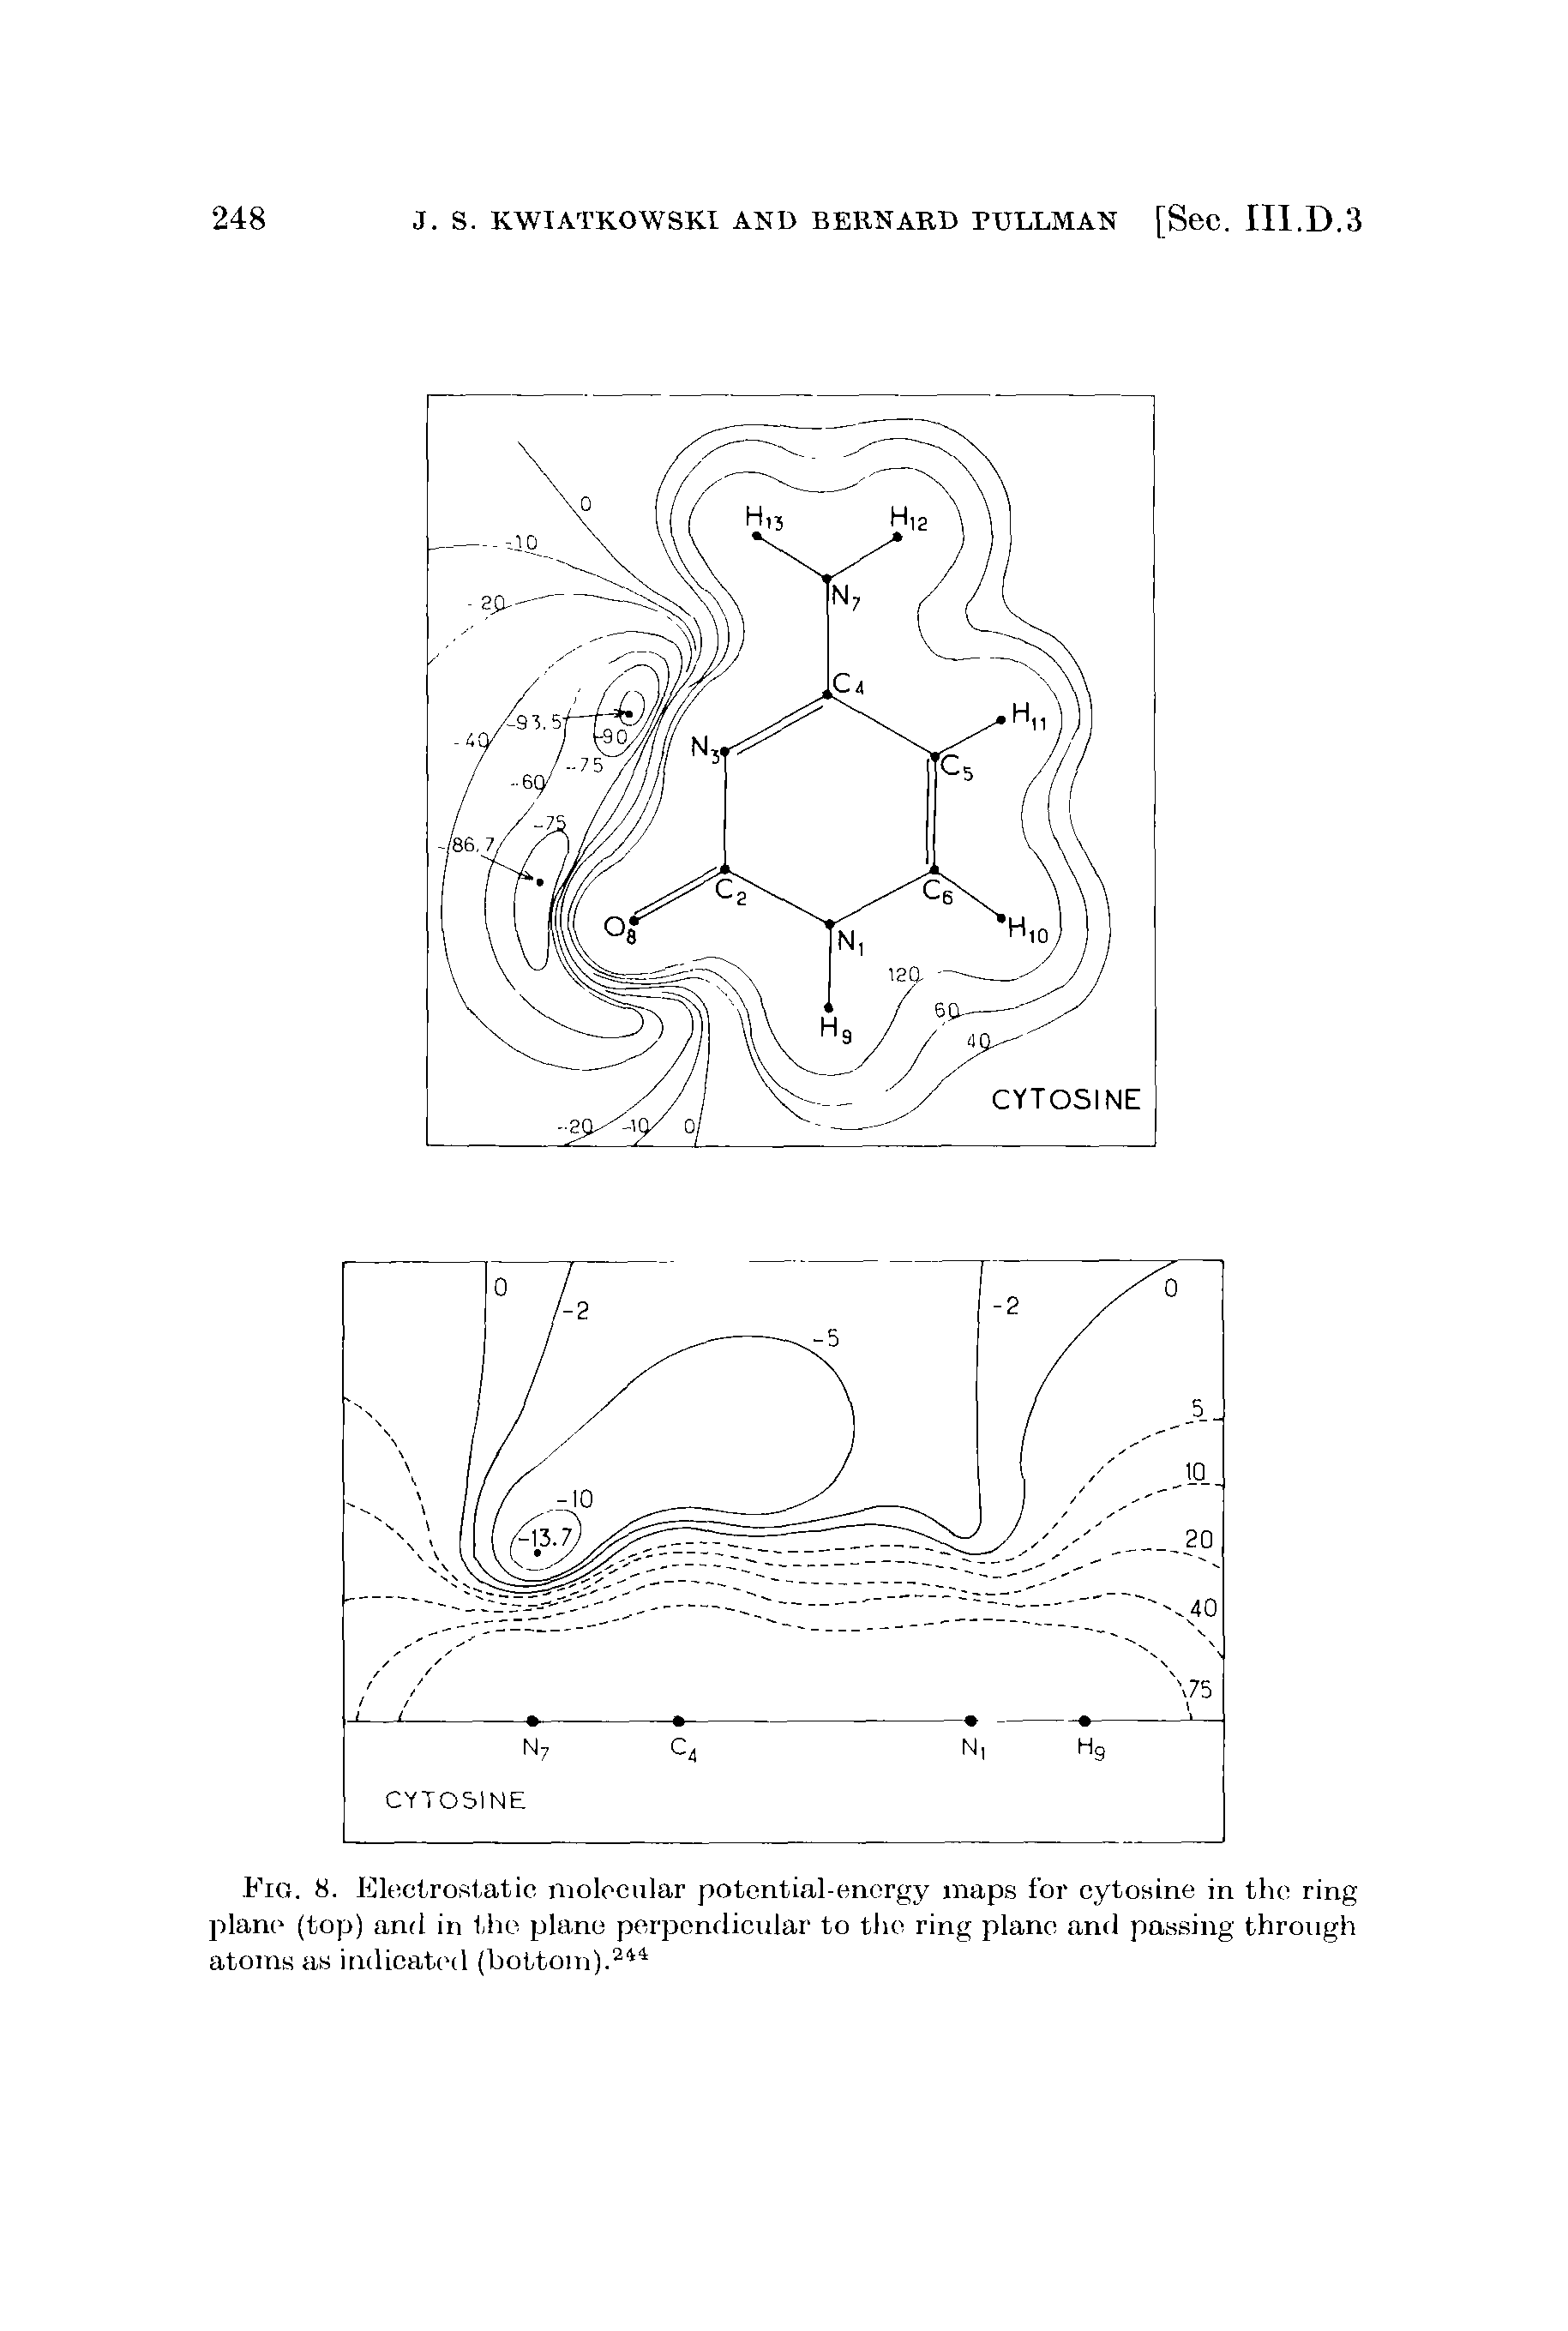 Fig. 8. Electrostatic molecular potential-energy maps for cytosine in the ring plane (top) and in the plane perpendicular to the ring plane and passing through atoms as indicated (bottom).244...